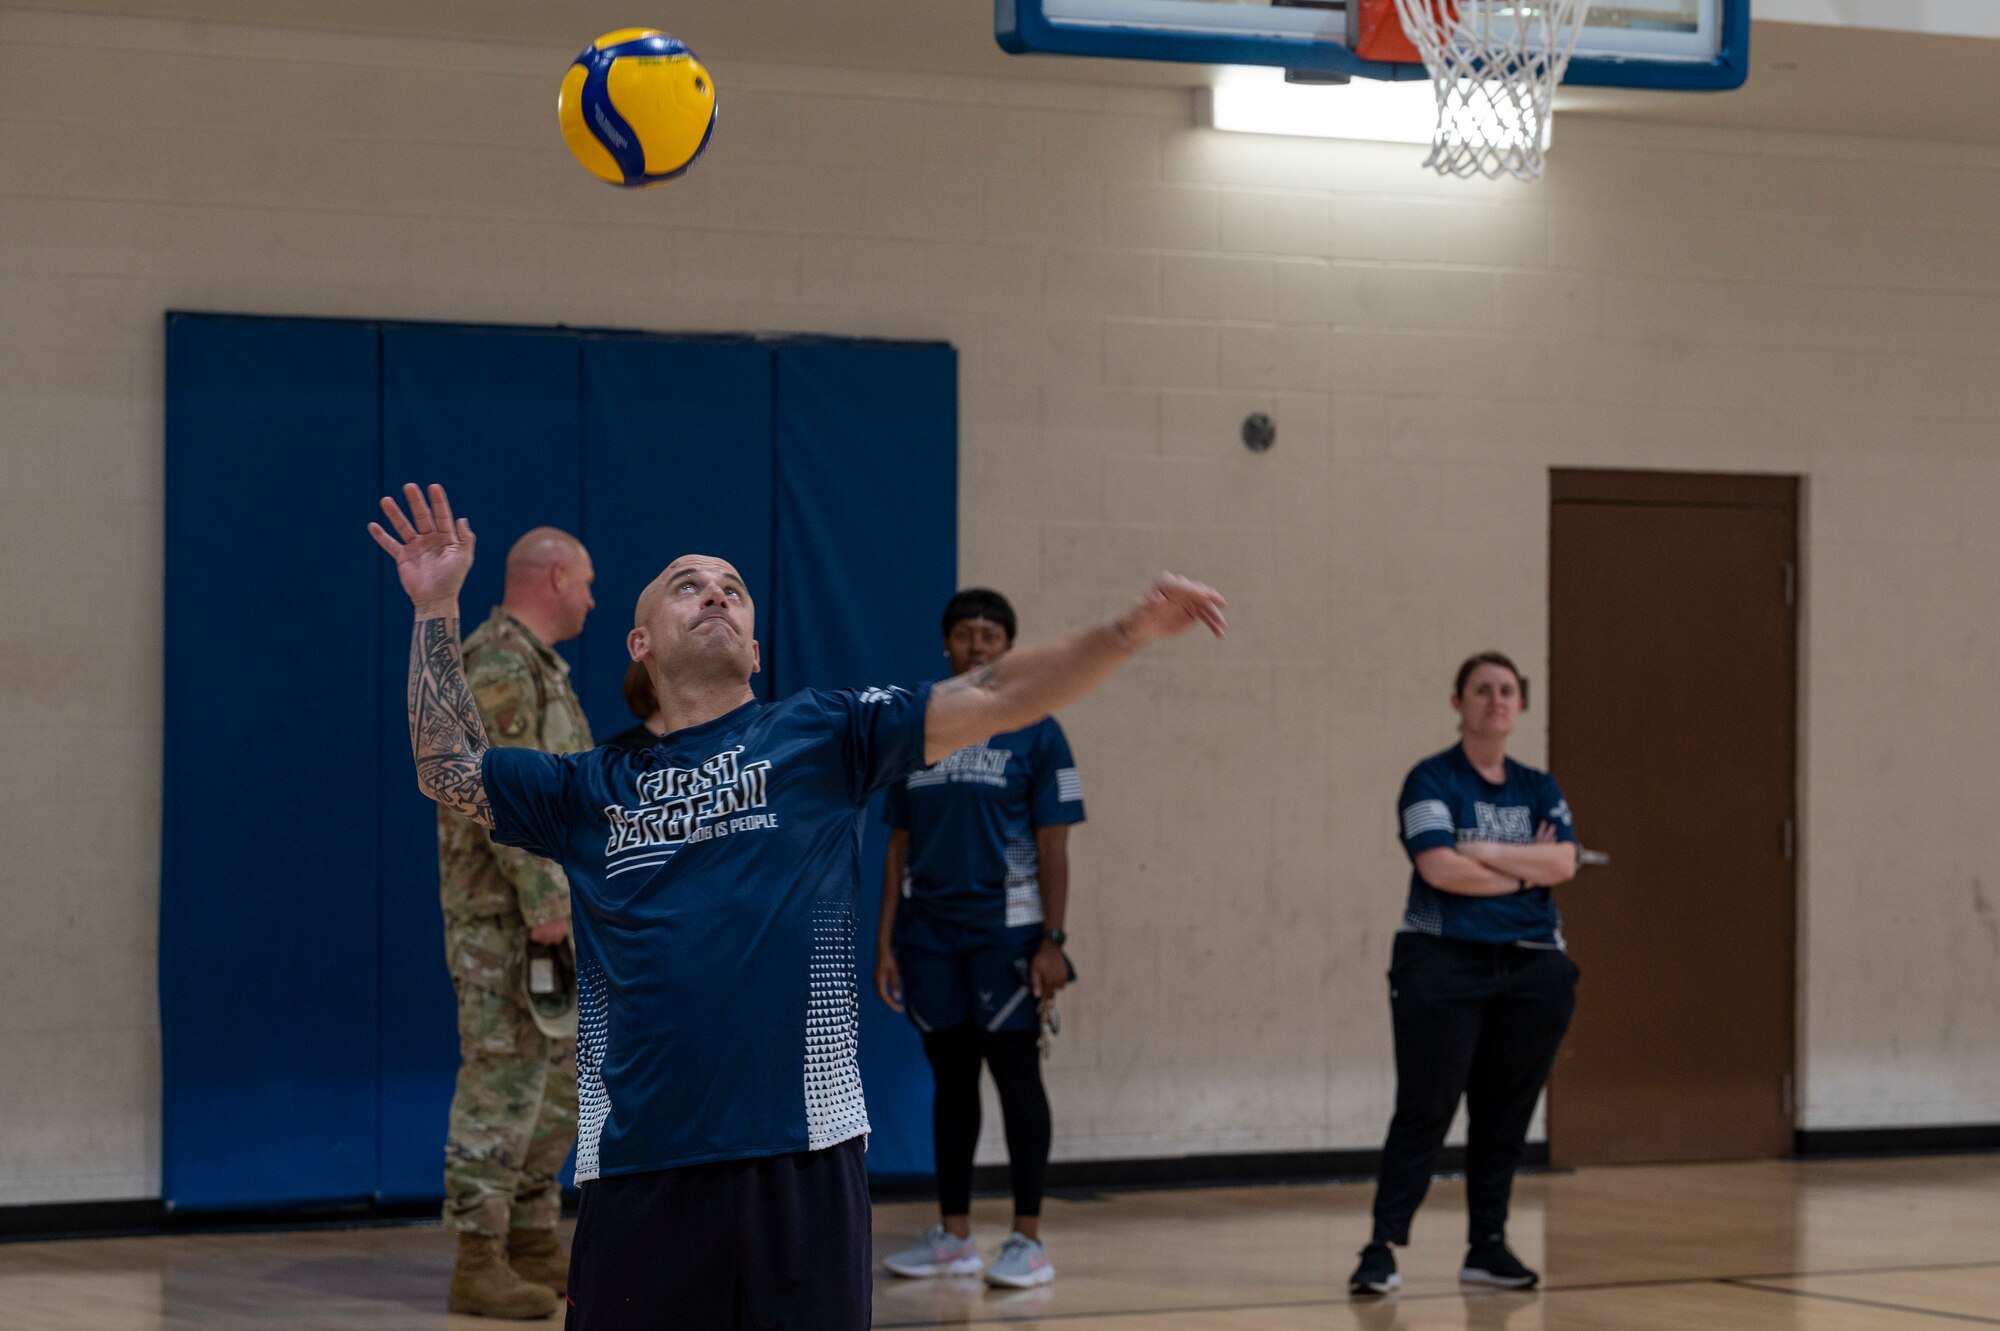 U.S. Air Force Chief Master Sgt. Ryan Taylor, Air Education and Training Command first sergeant, serves a volleyball during a game against Airman Leadership School students at Holloman Air Force Base, New Mexico, Dec. 9, 2022. Taylor is responsible for the management of all of the first sergeants within AETC. (U.S. Air Force photo by Airman 1st Class Nicholas Paczkowski)